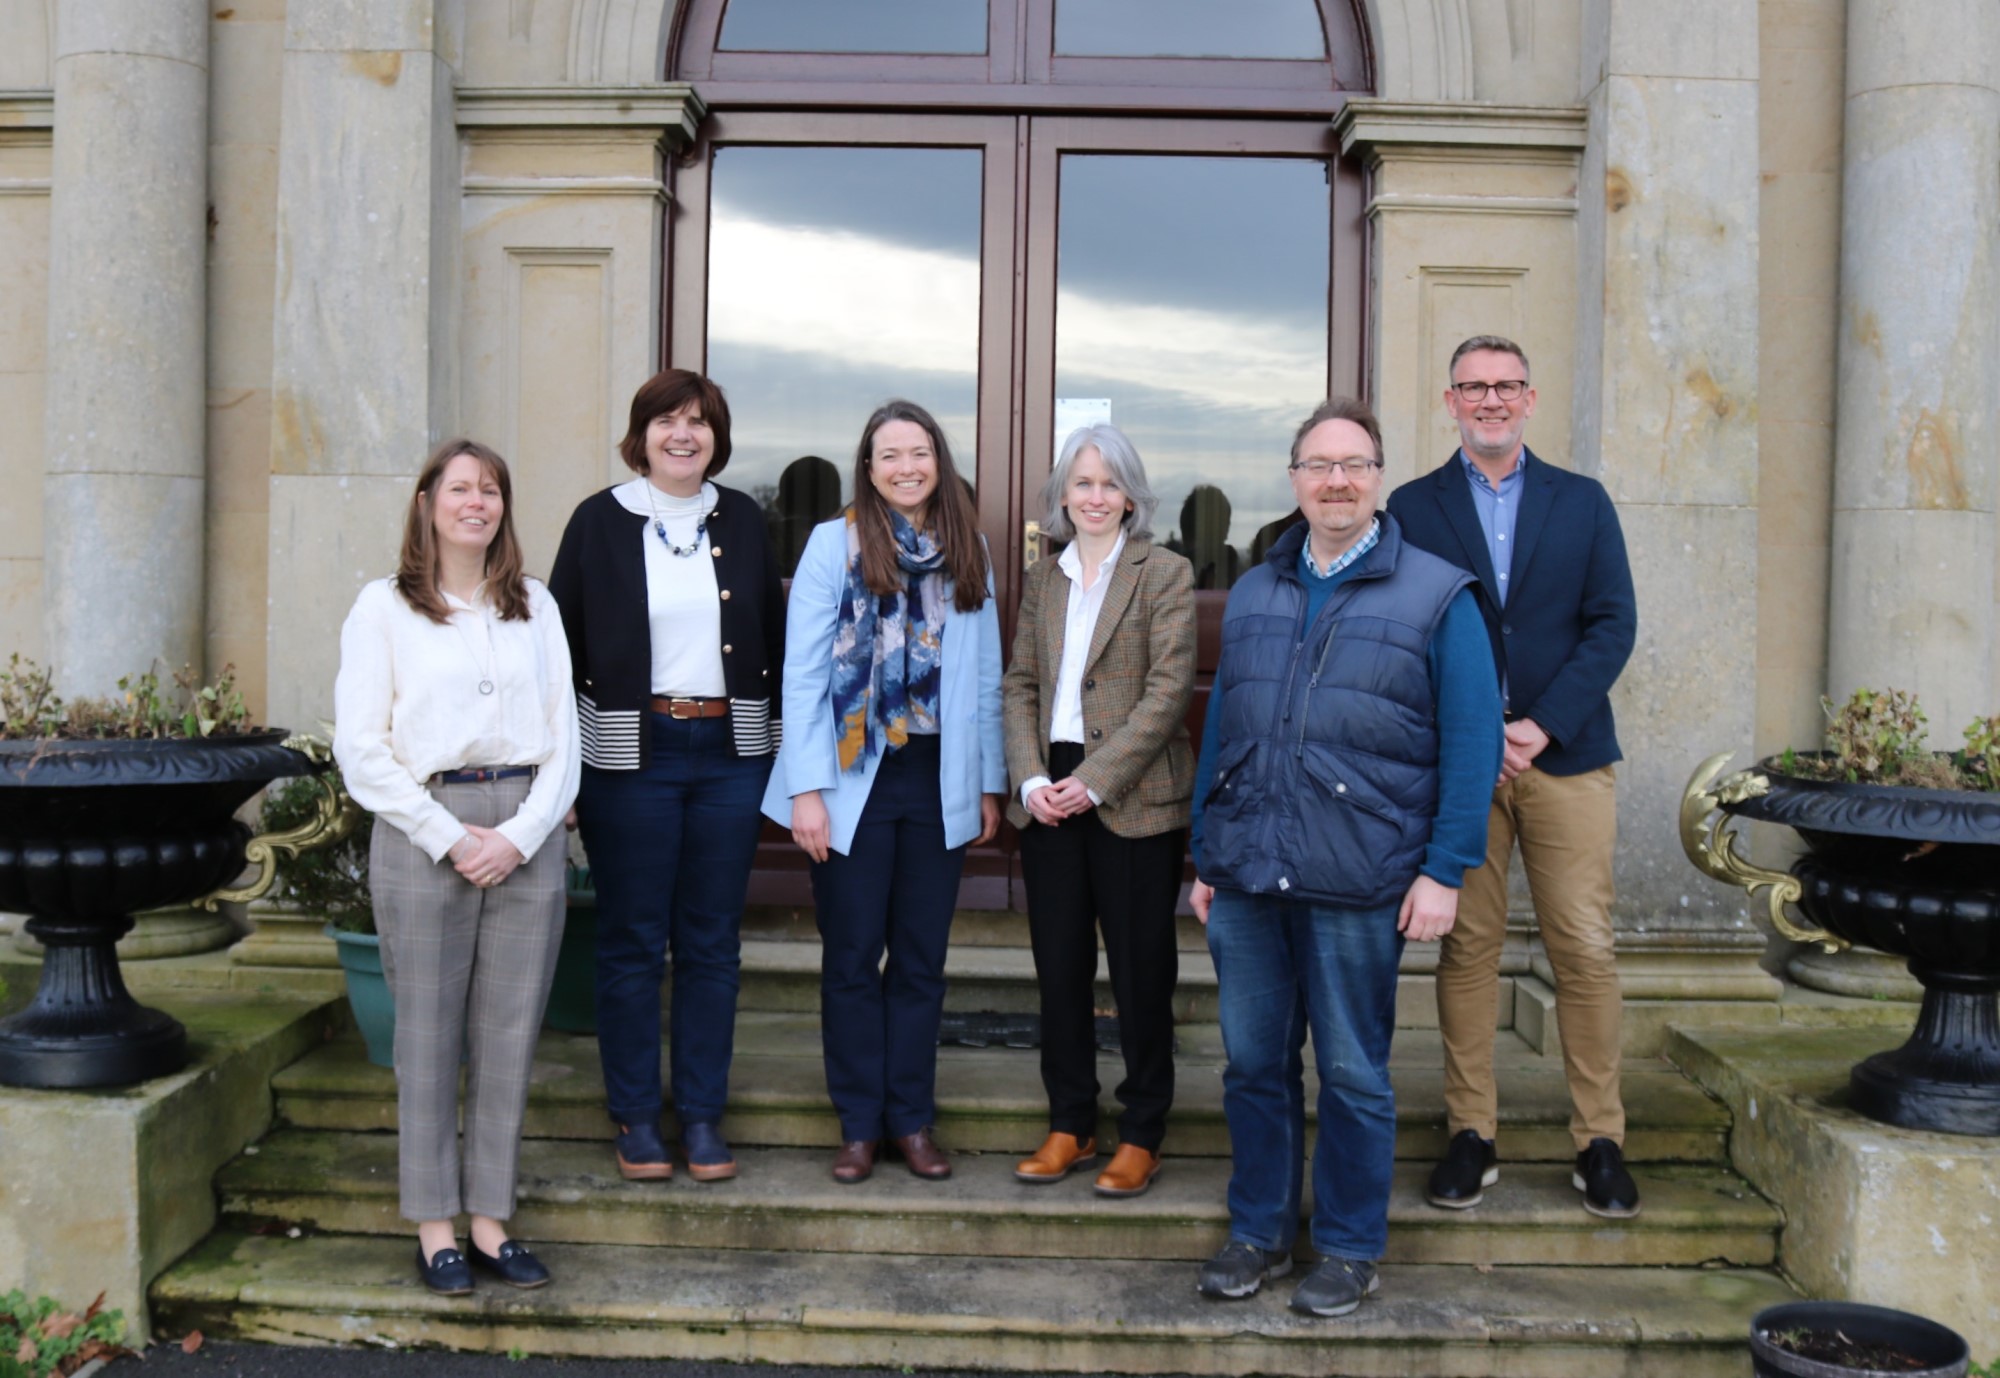 Pictured from left at the vocations retreat are Provost Lynda Peilow (Central Director of Ordinands), Judy Peters (Commission on Ministry), Dr Katie Heffelfinger (CITI), the Revd Julie Bell (Chaplain), Dr Sean Doherty (guest speaker) and the Revd Rob Jones (Pioneer Ministry National Director).